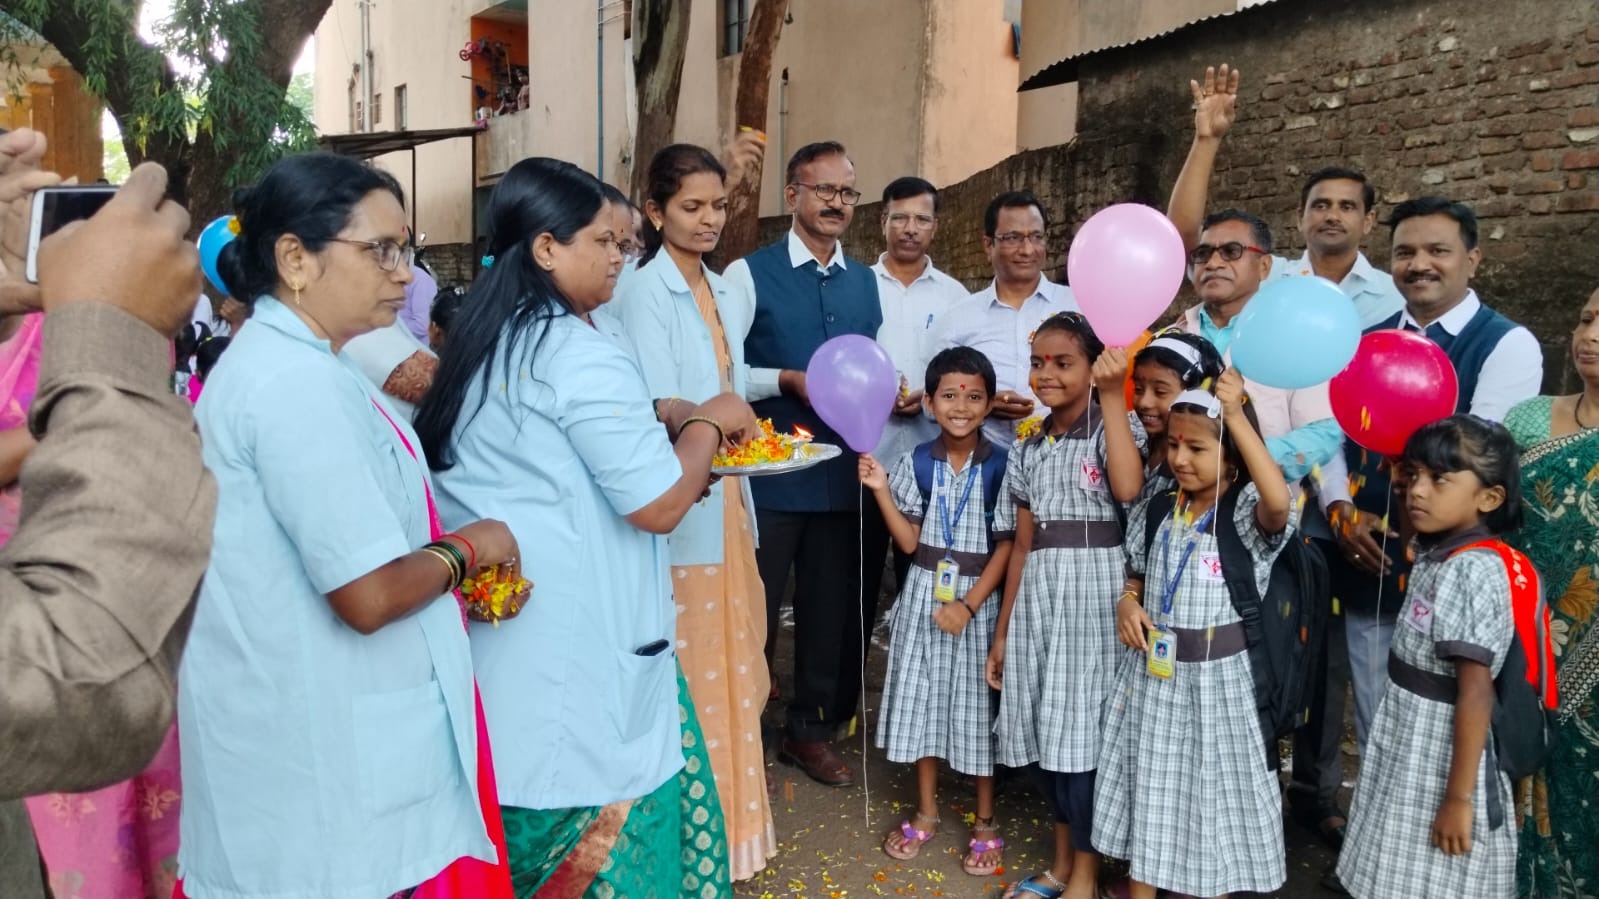 Korgaonkar High School welcomes newcomers on first day